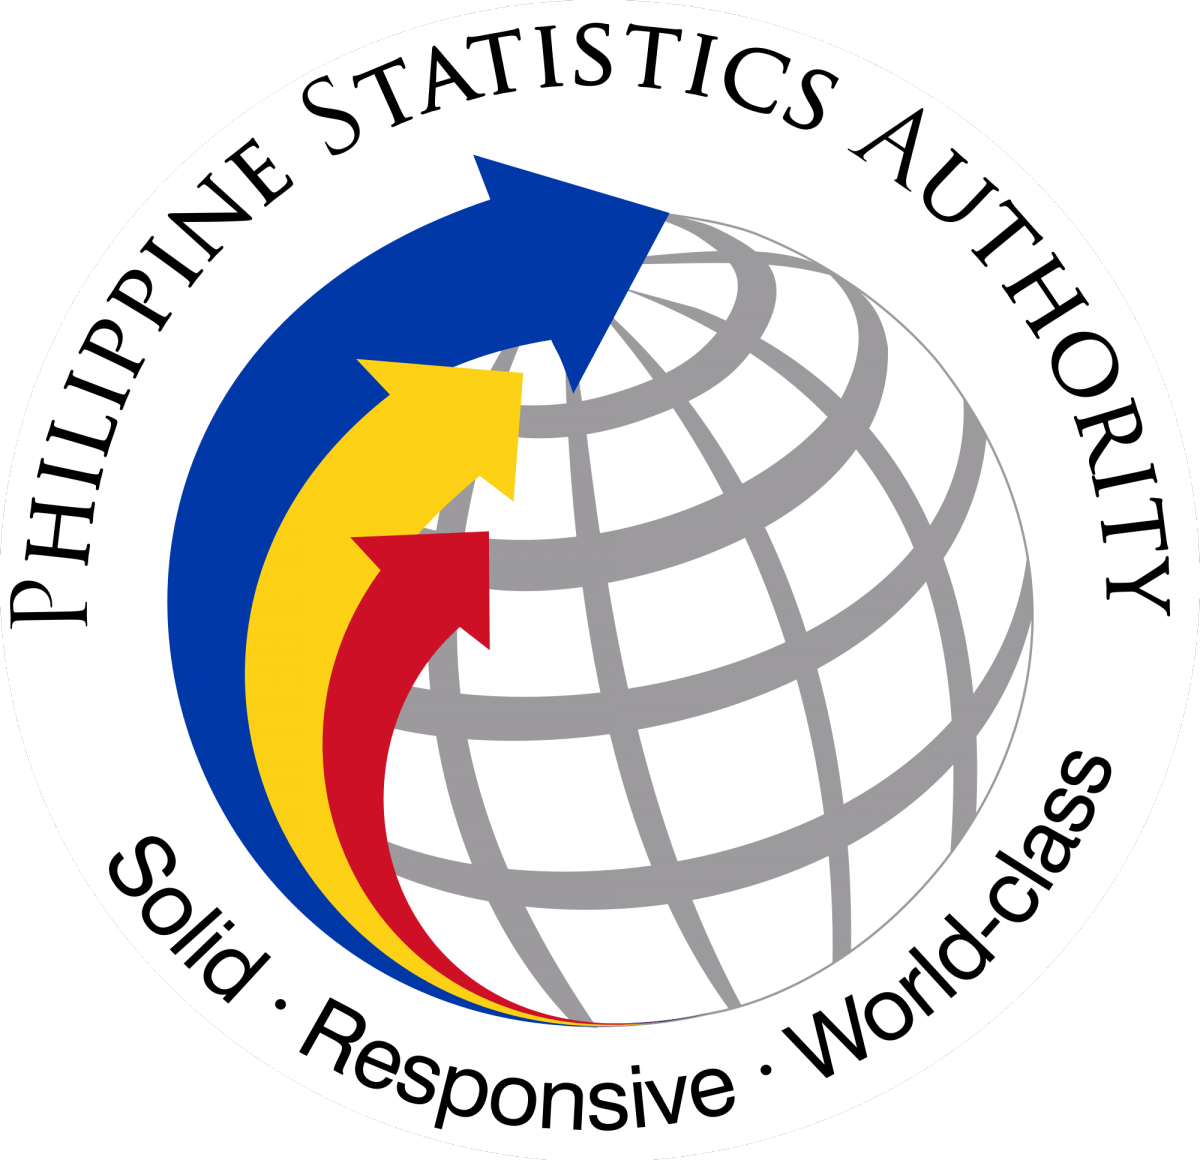 PSA Logo - The PSA Logo and Its Meaning | Philippine Statistics Authority|RSSO V